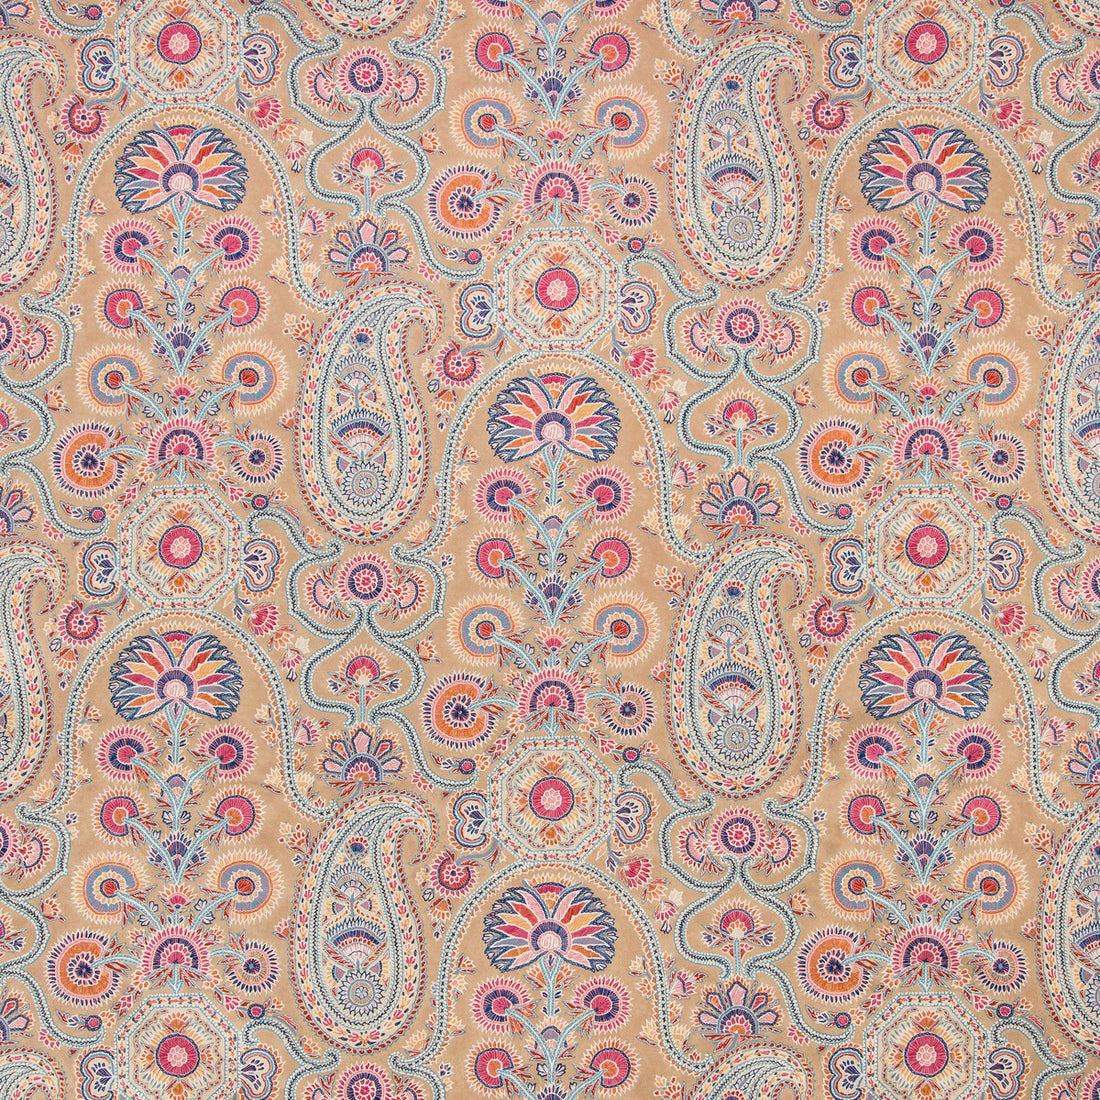 Saraya Print fabric in jewel color - pattern 8020100.1657.0 - by Brunschwig &amp; Fils in the Grand Bazaar collection